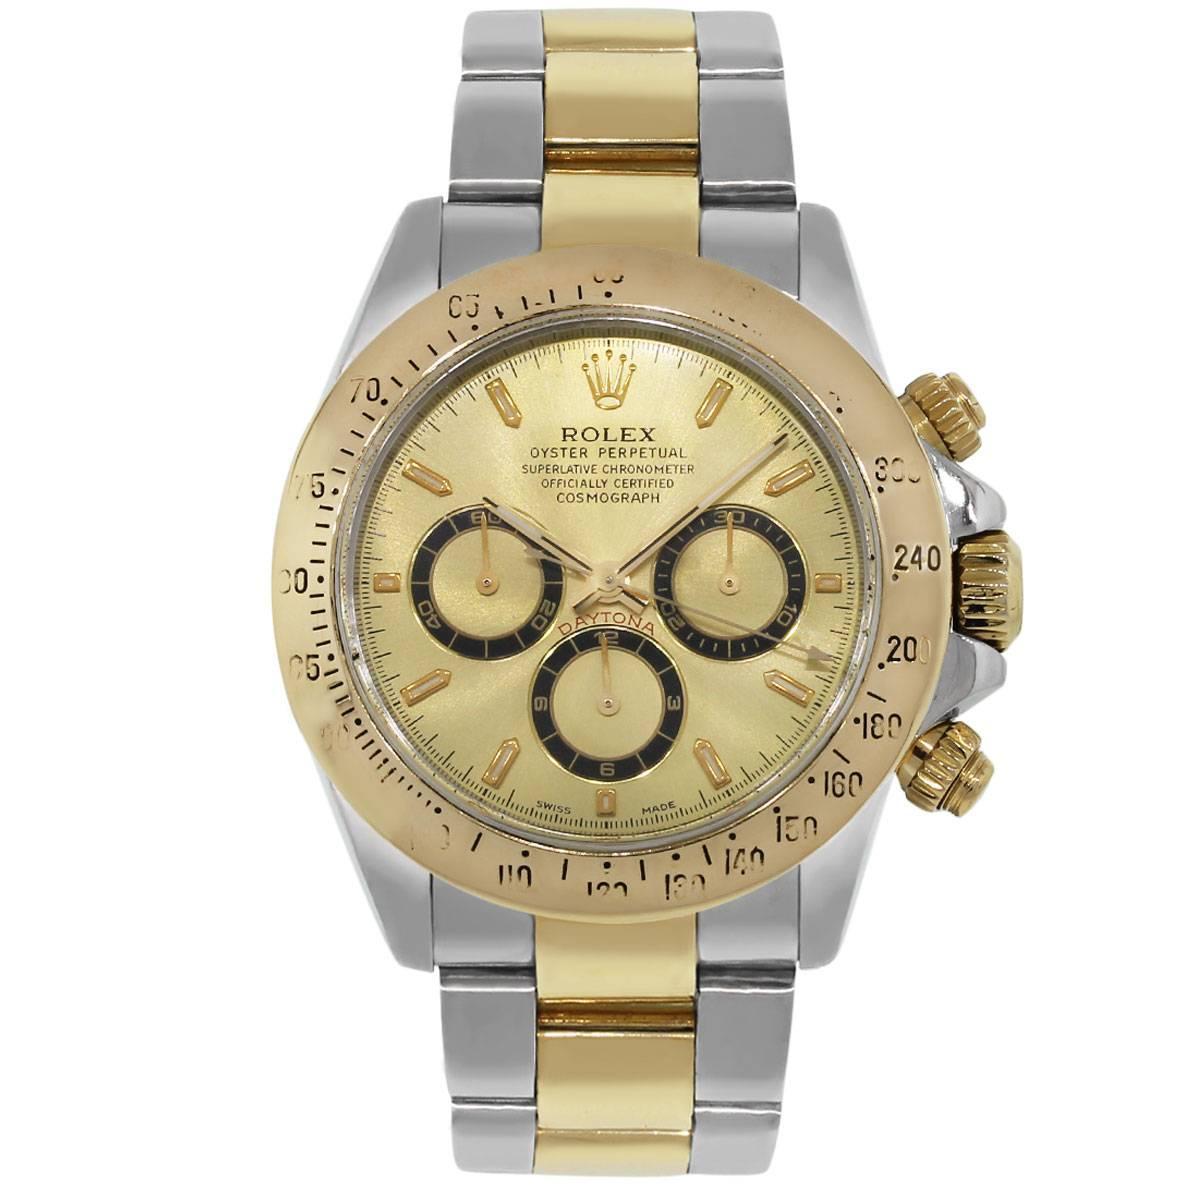 Rolex Daytona 16523 Two Tone Champagne Dial Watch For Sale at 1stdibs